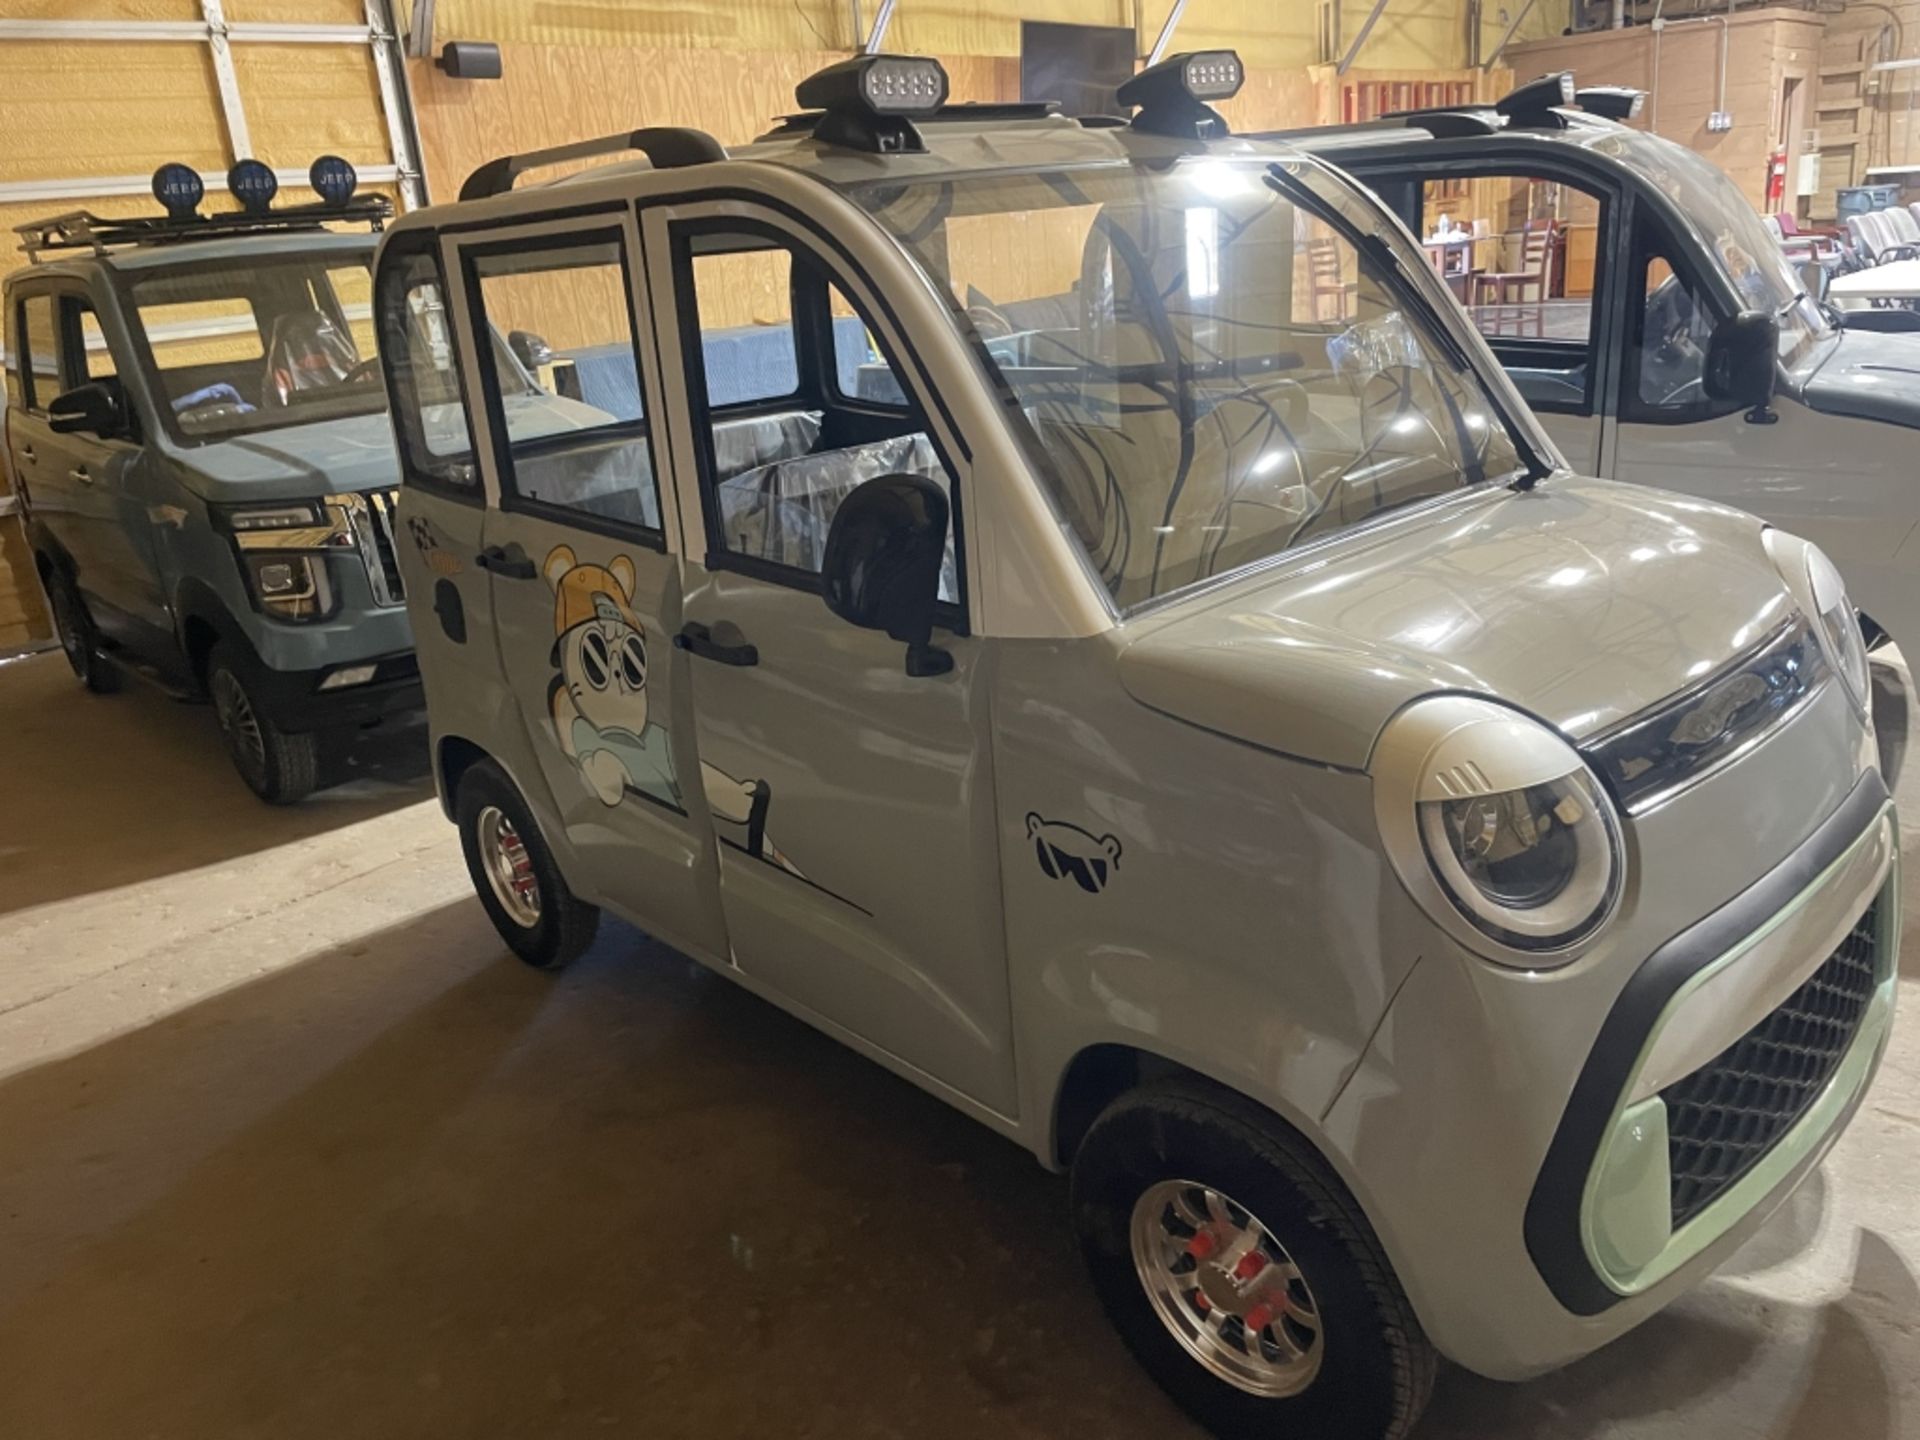 MECO M-F Electric Vehicle - Image 8 of 30